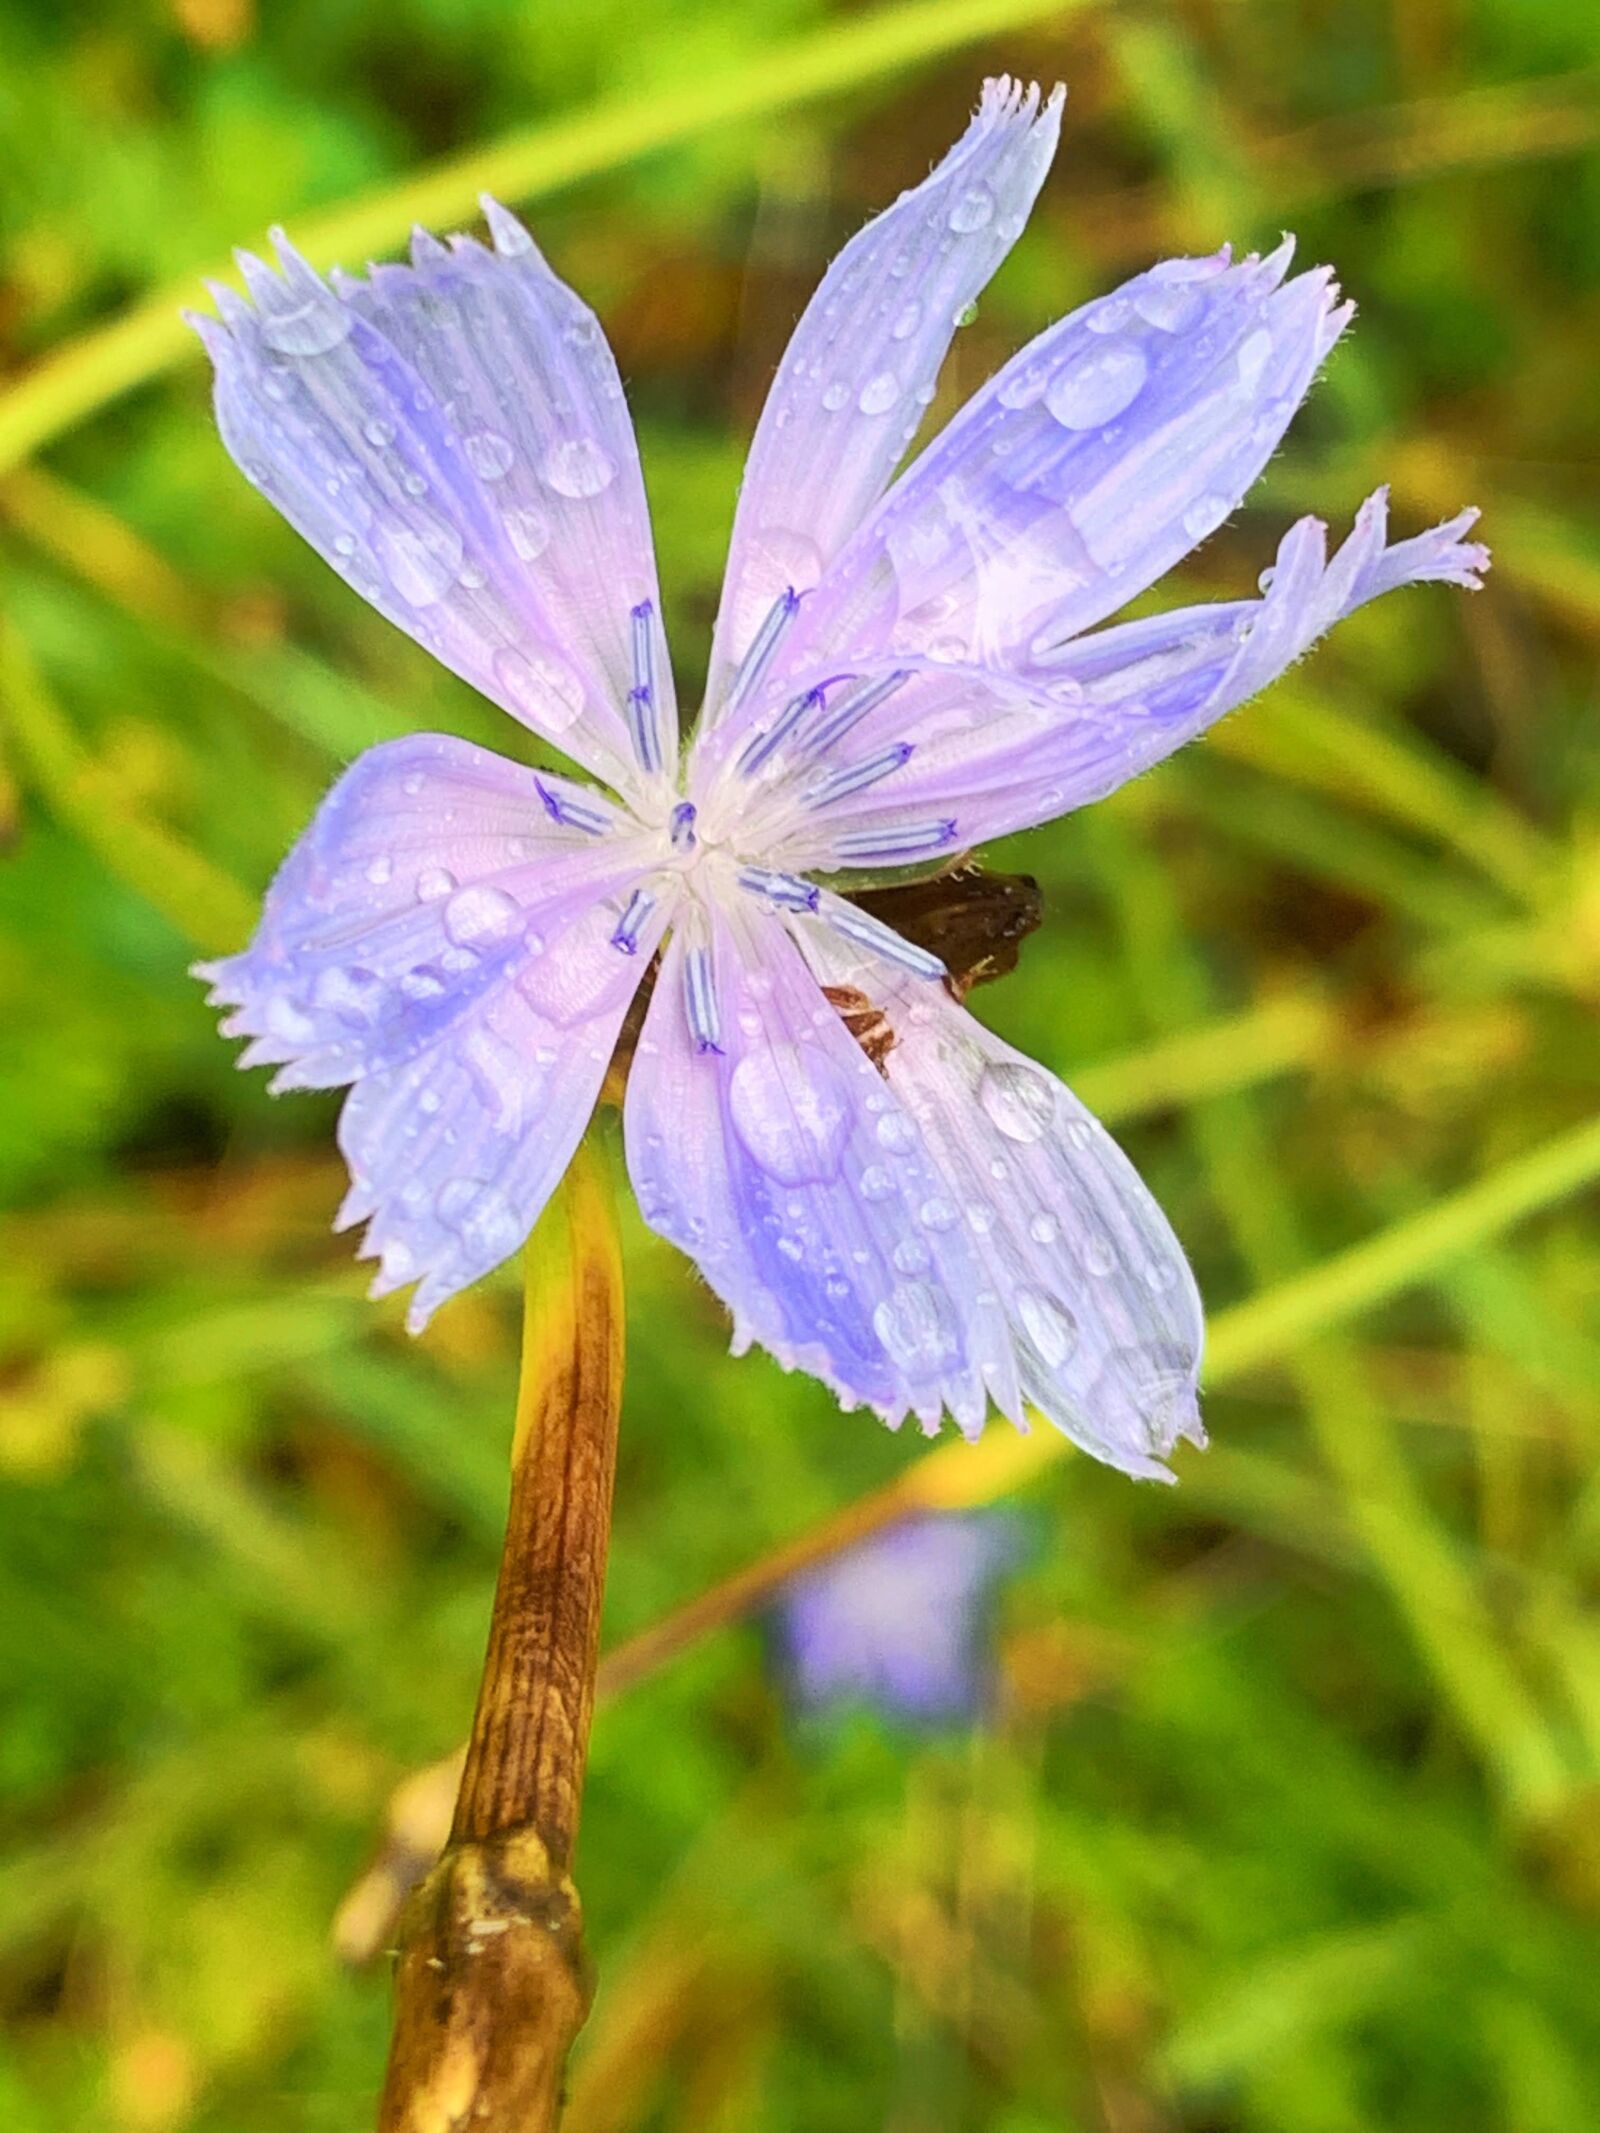 Apple iPhone XS Max + iPhone XS Max back dual camera 4.25mm f/1.8 sample photo. Rain drops, wildflower, flower photography